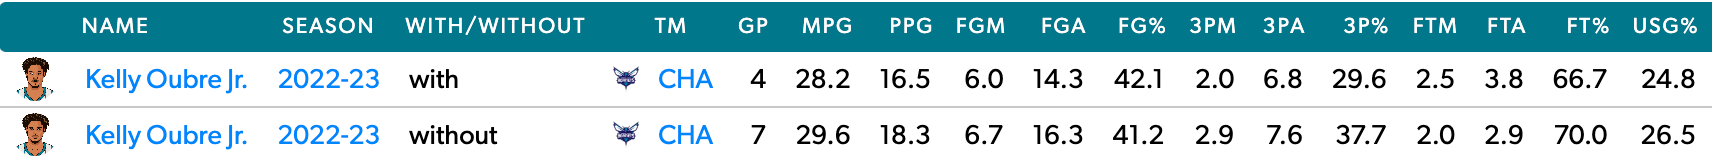 Kelly Oubre's splits with and without Terry Rozier this season.